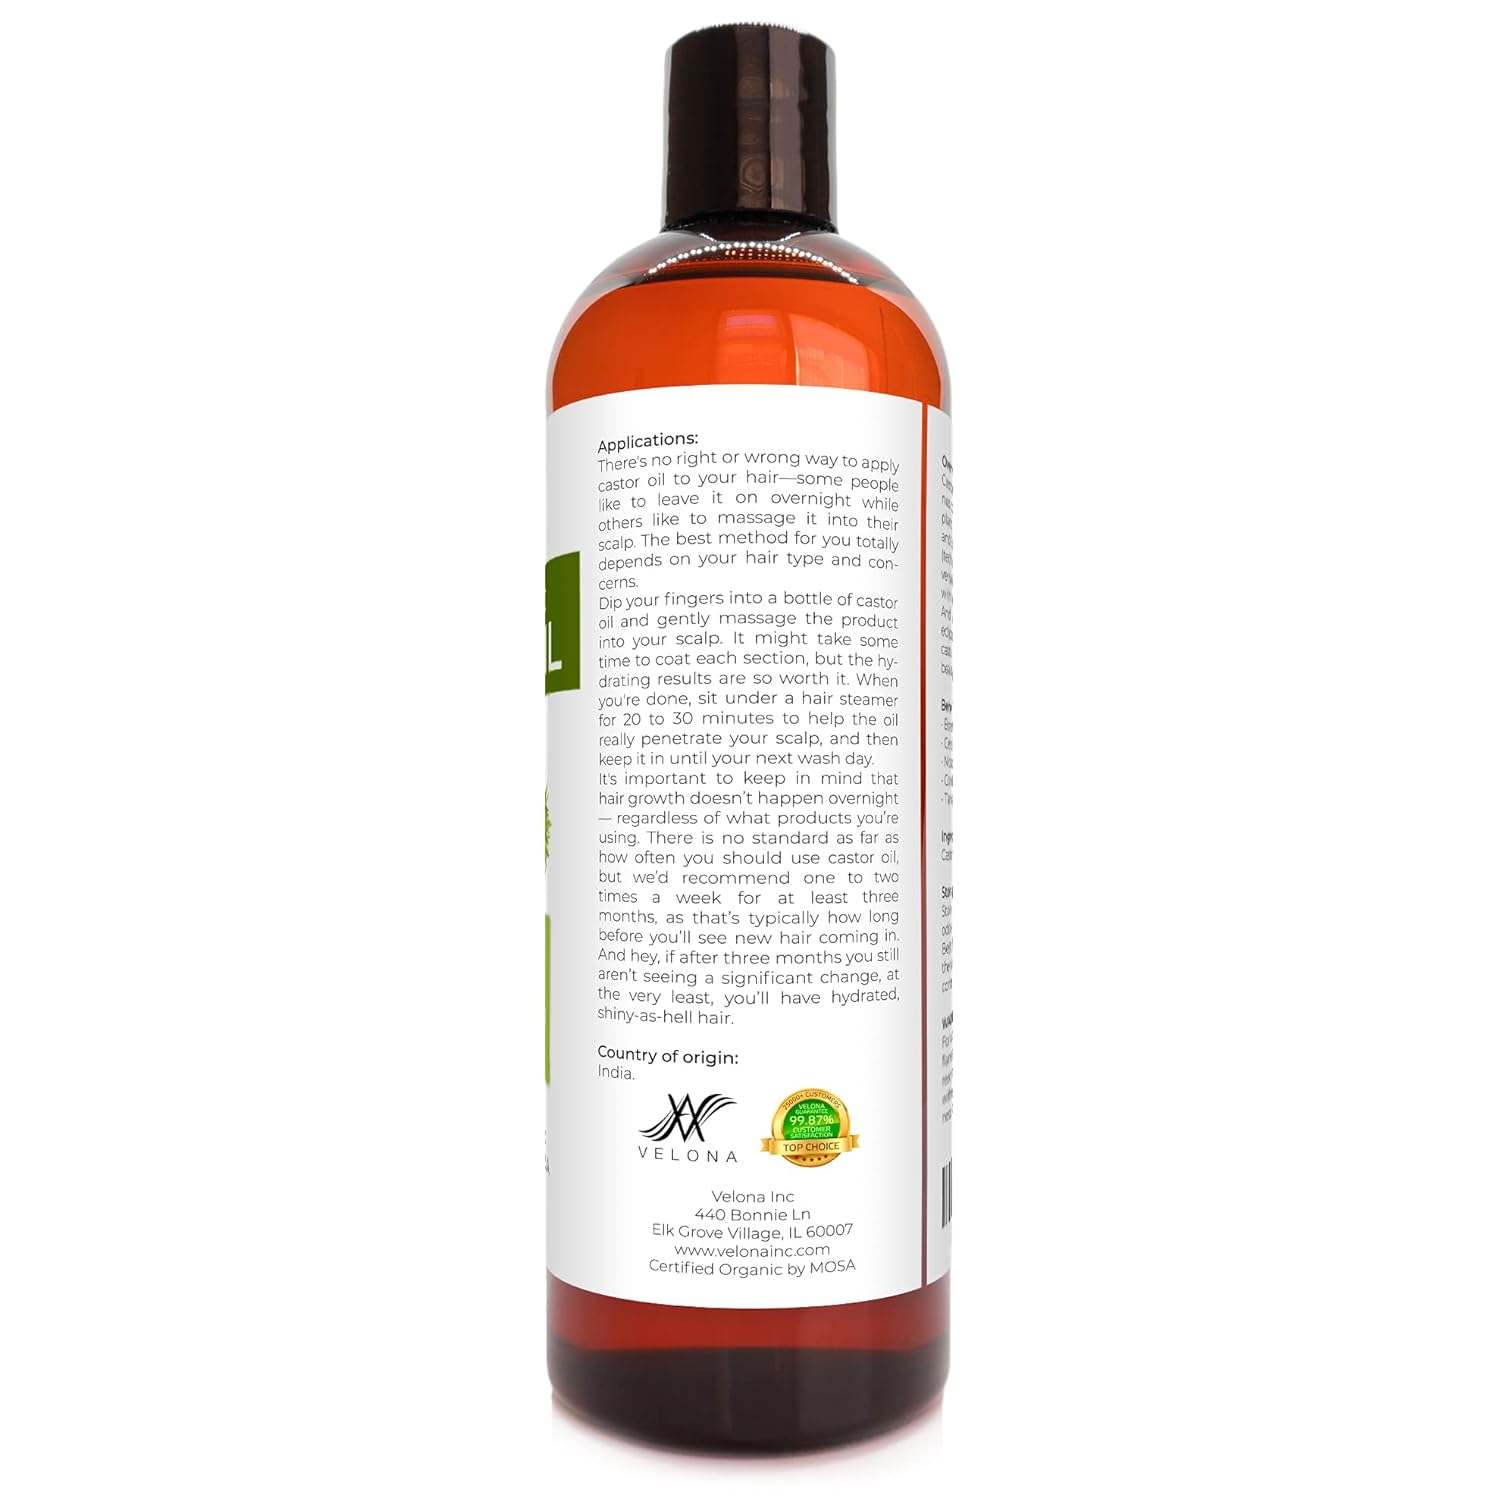 Velona USDA Certified Organic Castor Oil - 16 oz (With Pump) | For Hair, Boost Eyelashes, Eyebrows | Cold pressed, Natural Oil, USP Grade | Hexane Free, Lash Serum, Caster - Premium castor oil from Concordia Style Boutique - Just $17.62! Shop now at Concordia Style Boutique